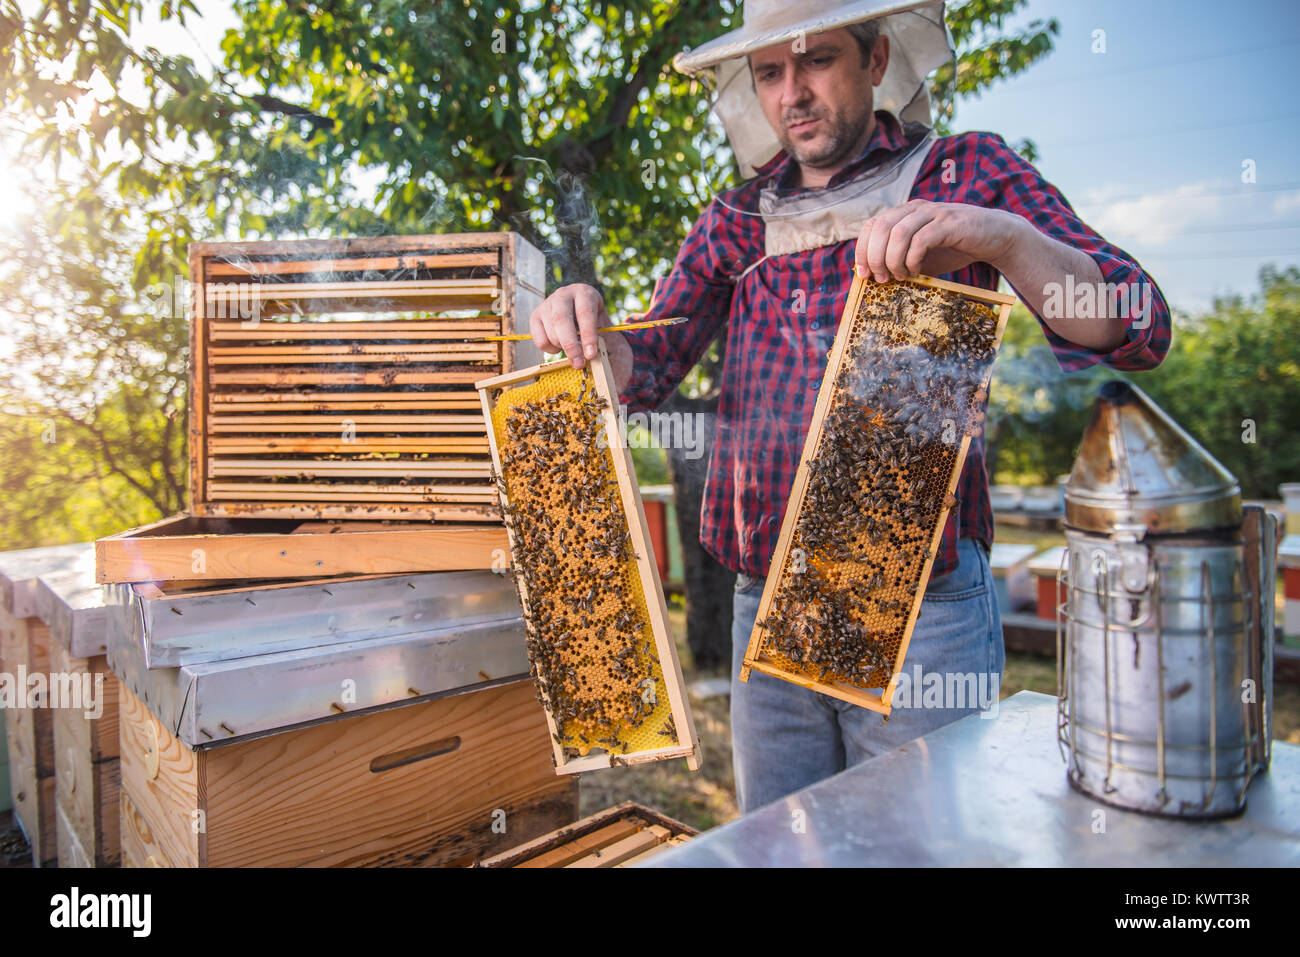 Beekeeper checking his honey bees and beehives while holding frames Stock Photo